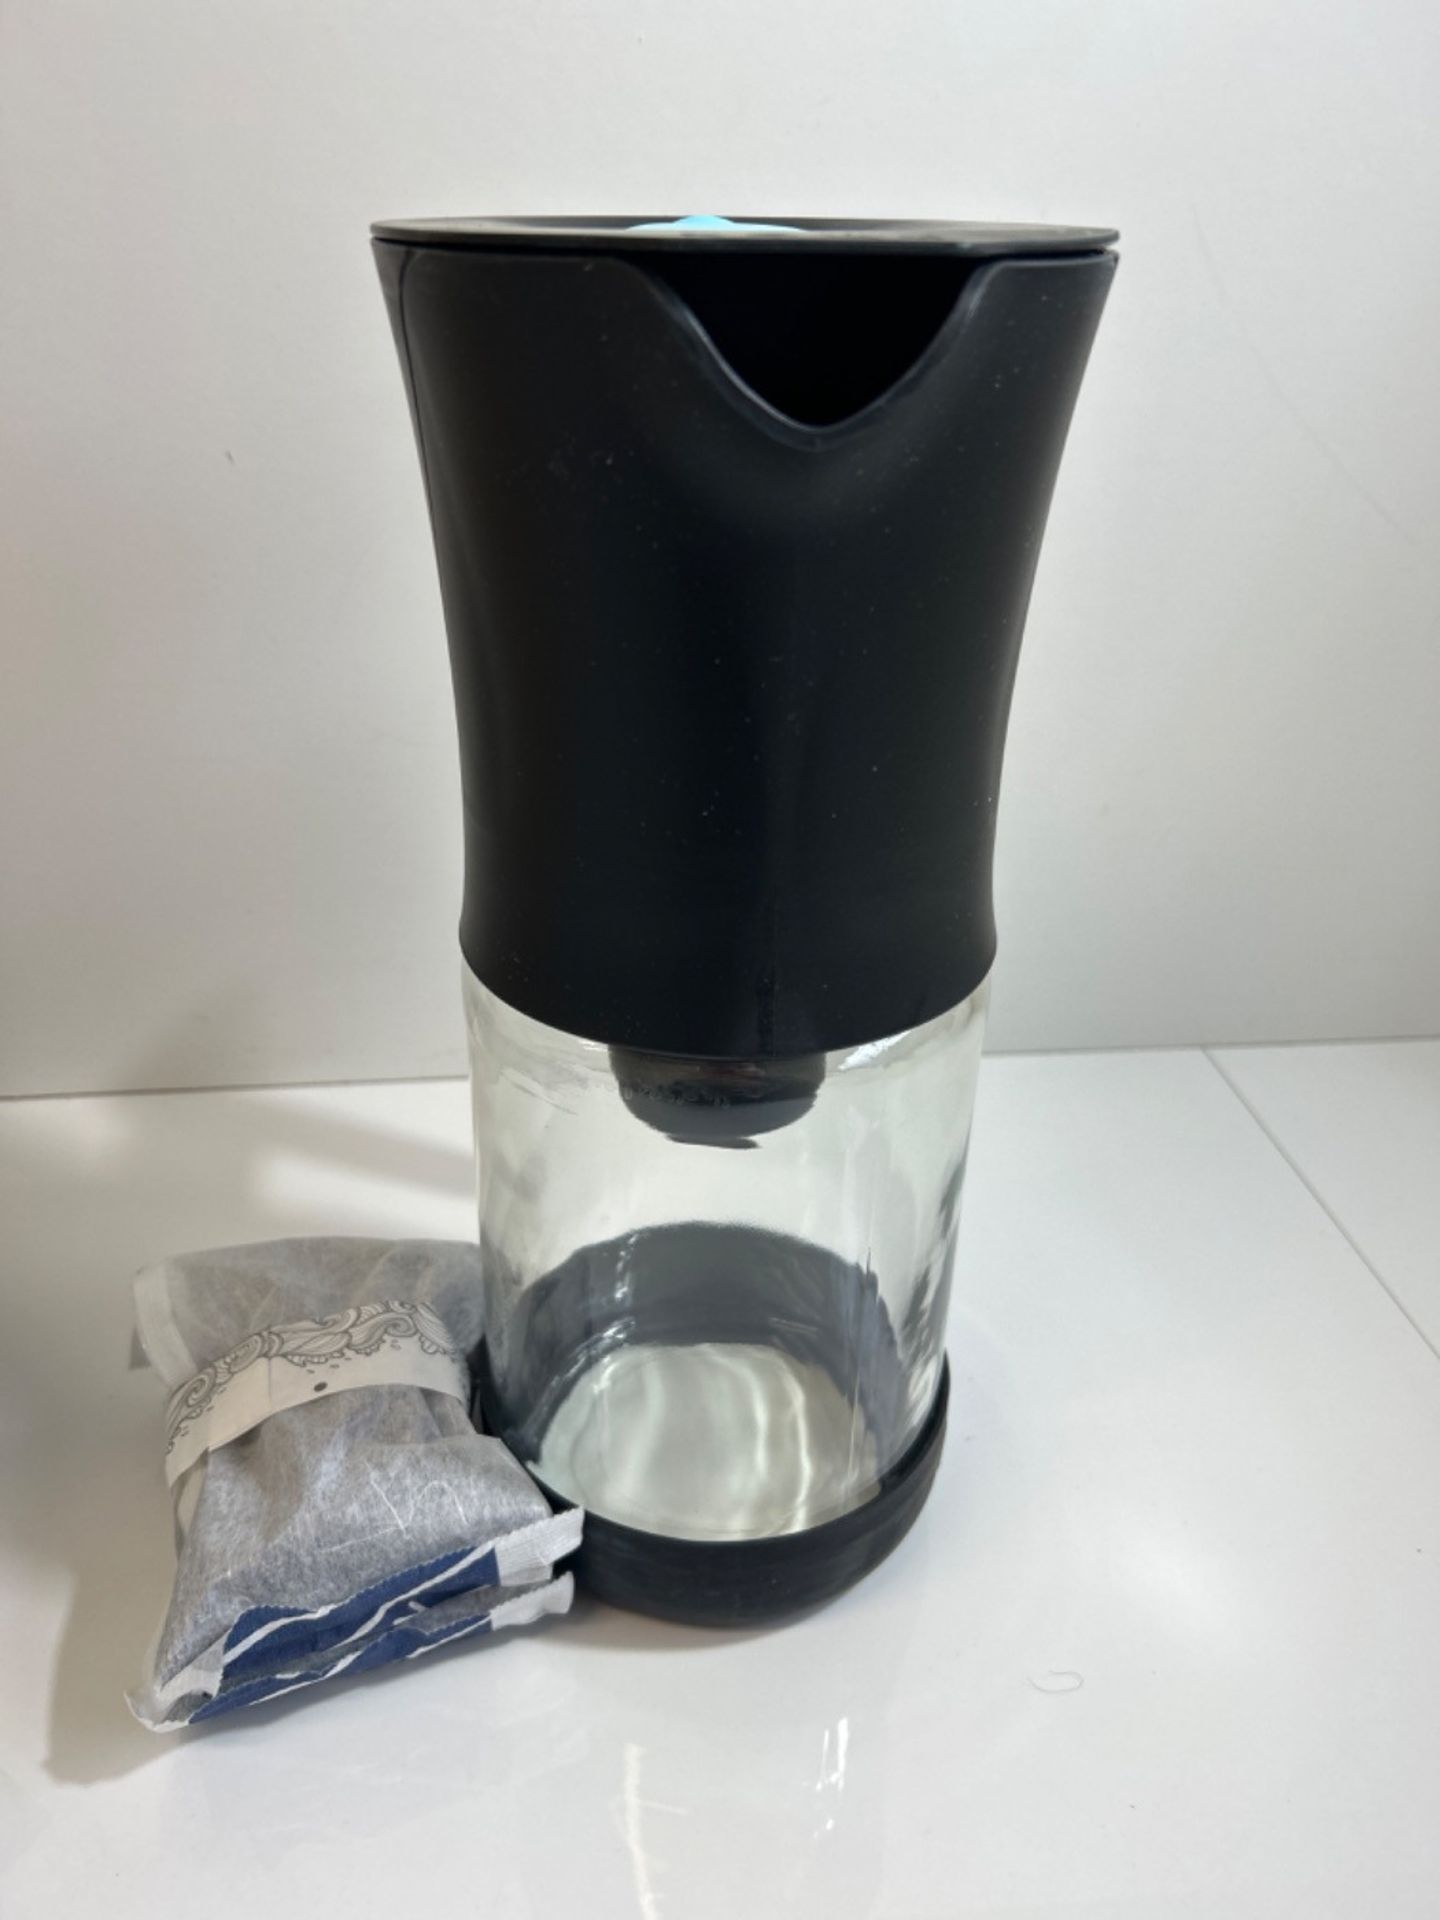 Phox V2 Water Filter | 2.2L Glass Water Filter Jug and Cartridge | 3 Month Supply (Clean Pack) - Bild 2 aus 3